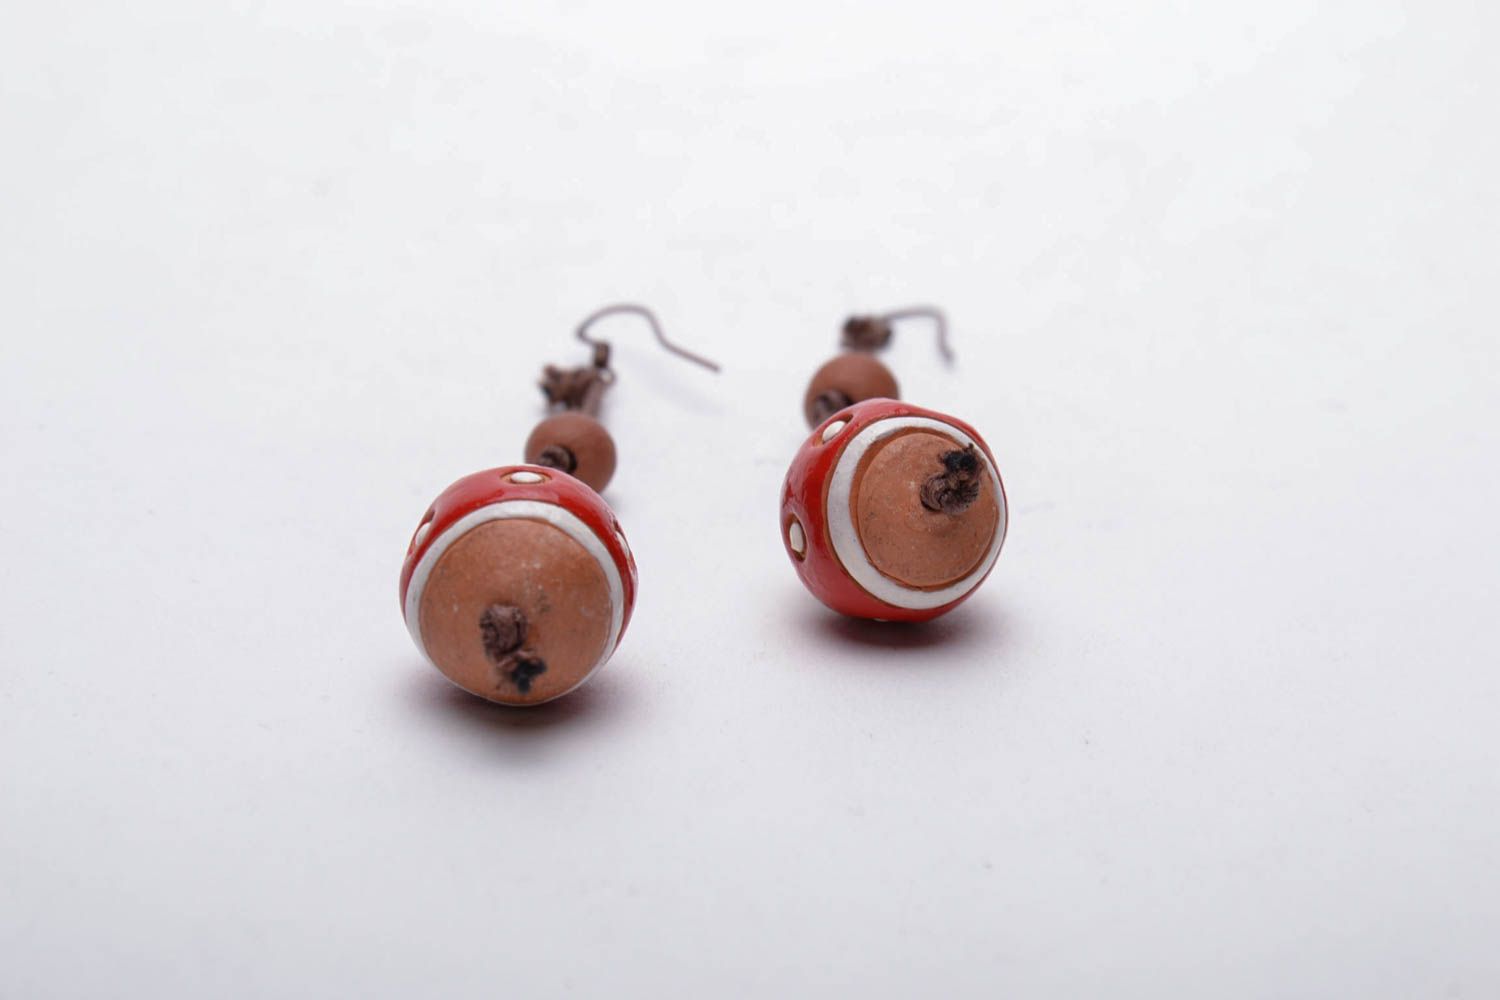 Ceramic ball earrings in eco style photo 4